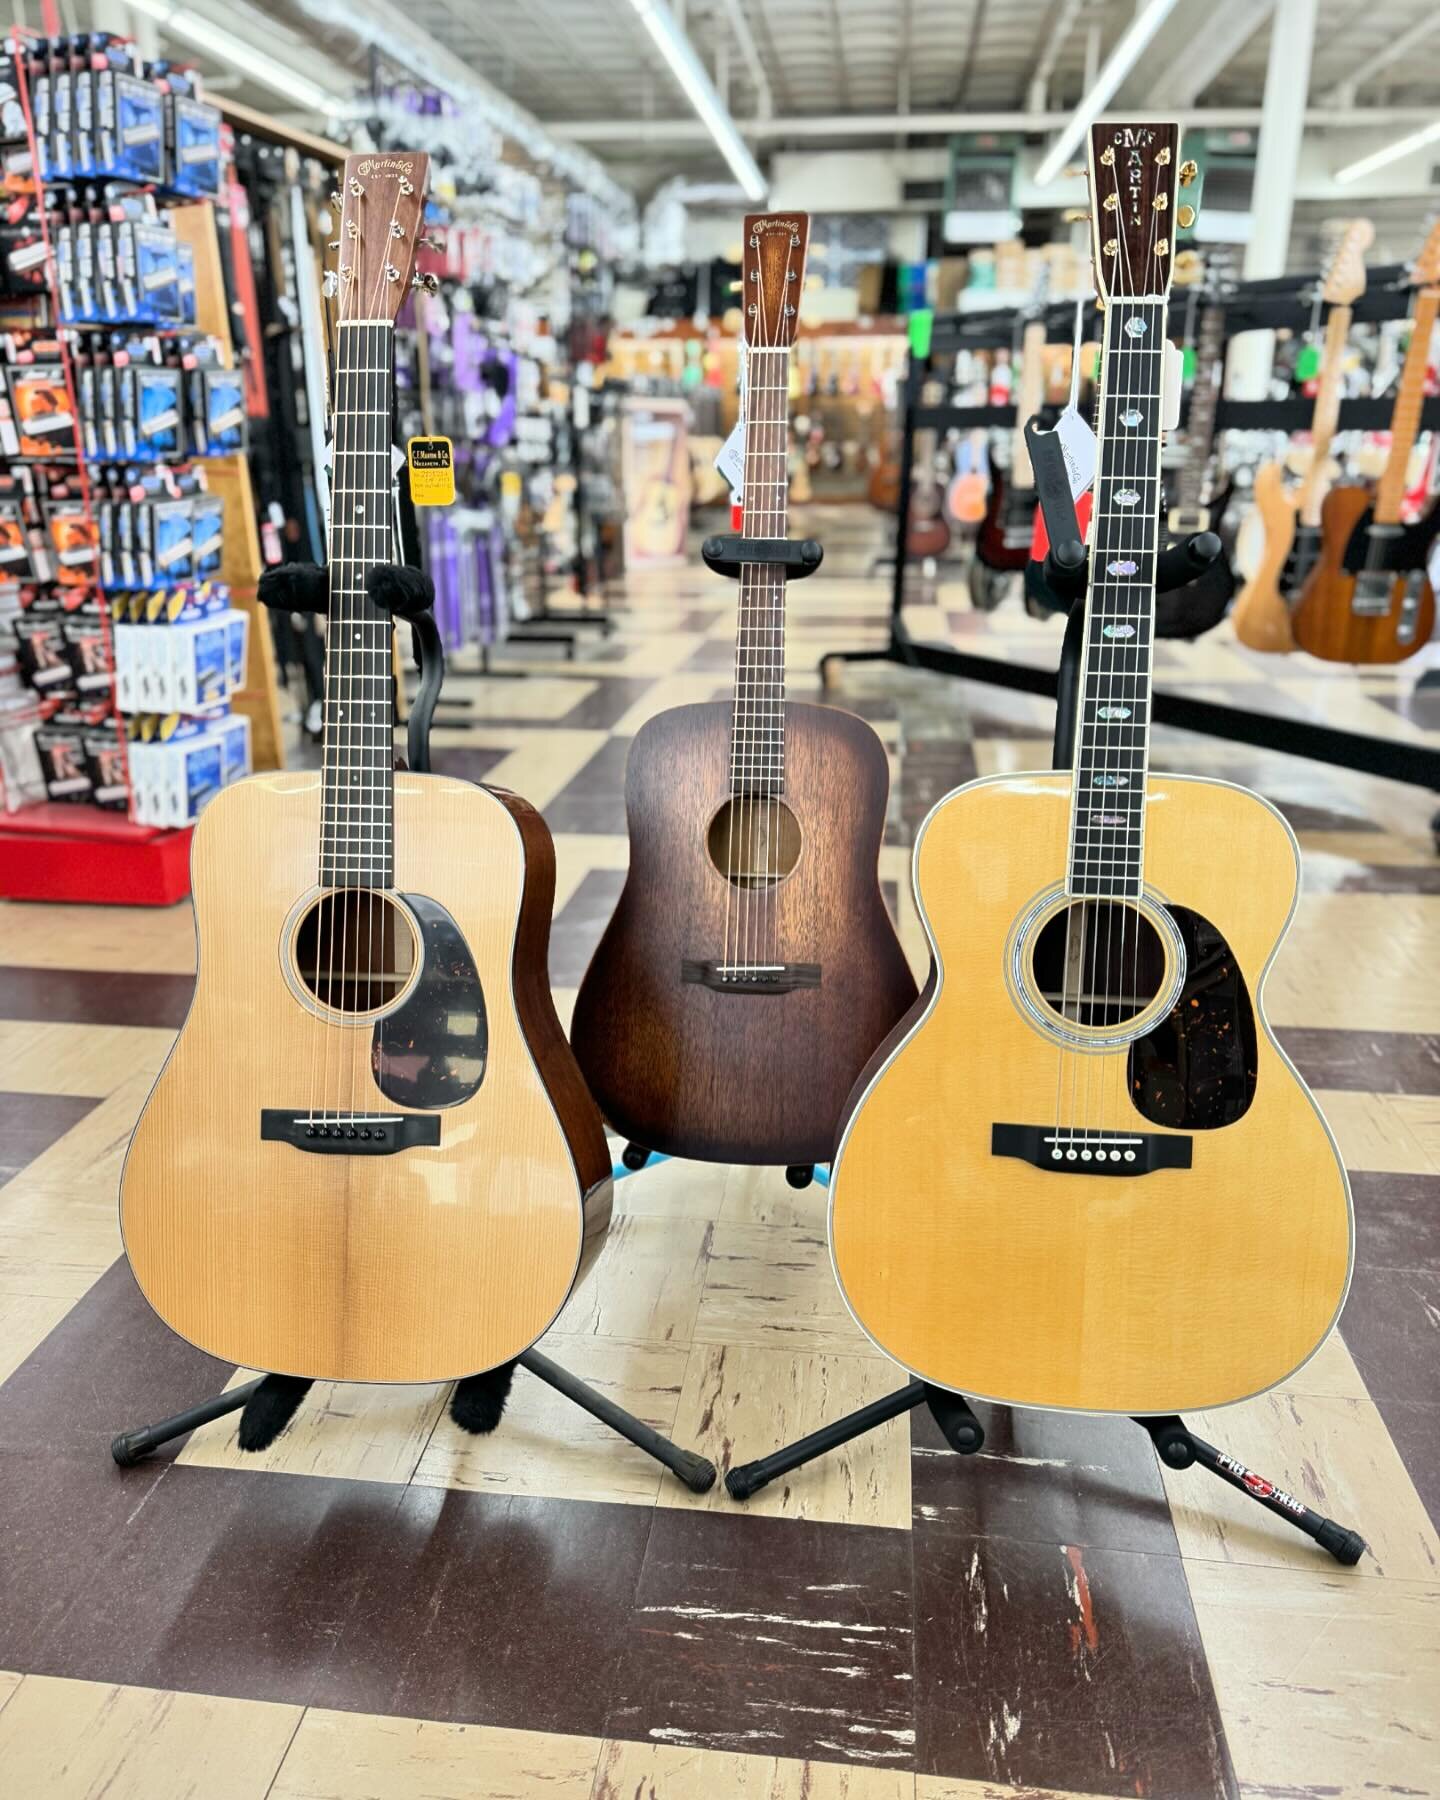 New @martinguitar in stock!  Just arrived is a D-15m streetmaster, J-40, and the 1937 D-18 authentic.  The authentic will not last long we promise.  Call for pricing or better yet come on by and check them out for yourself.  #martinguitars #authentic